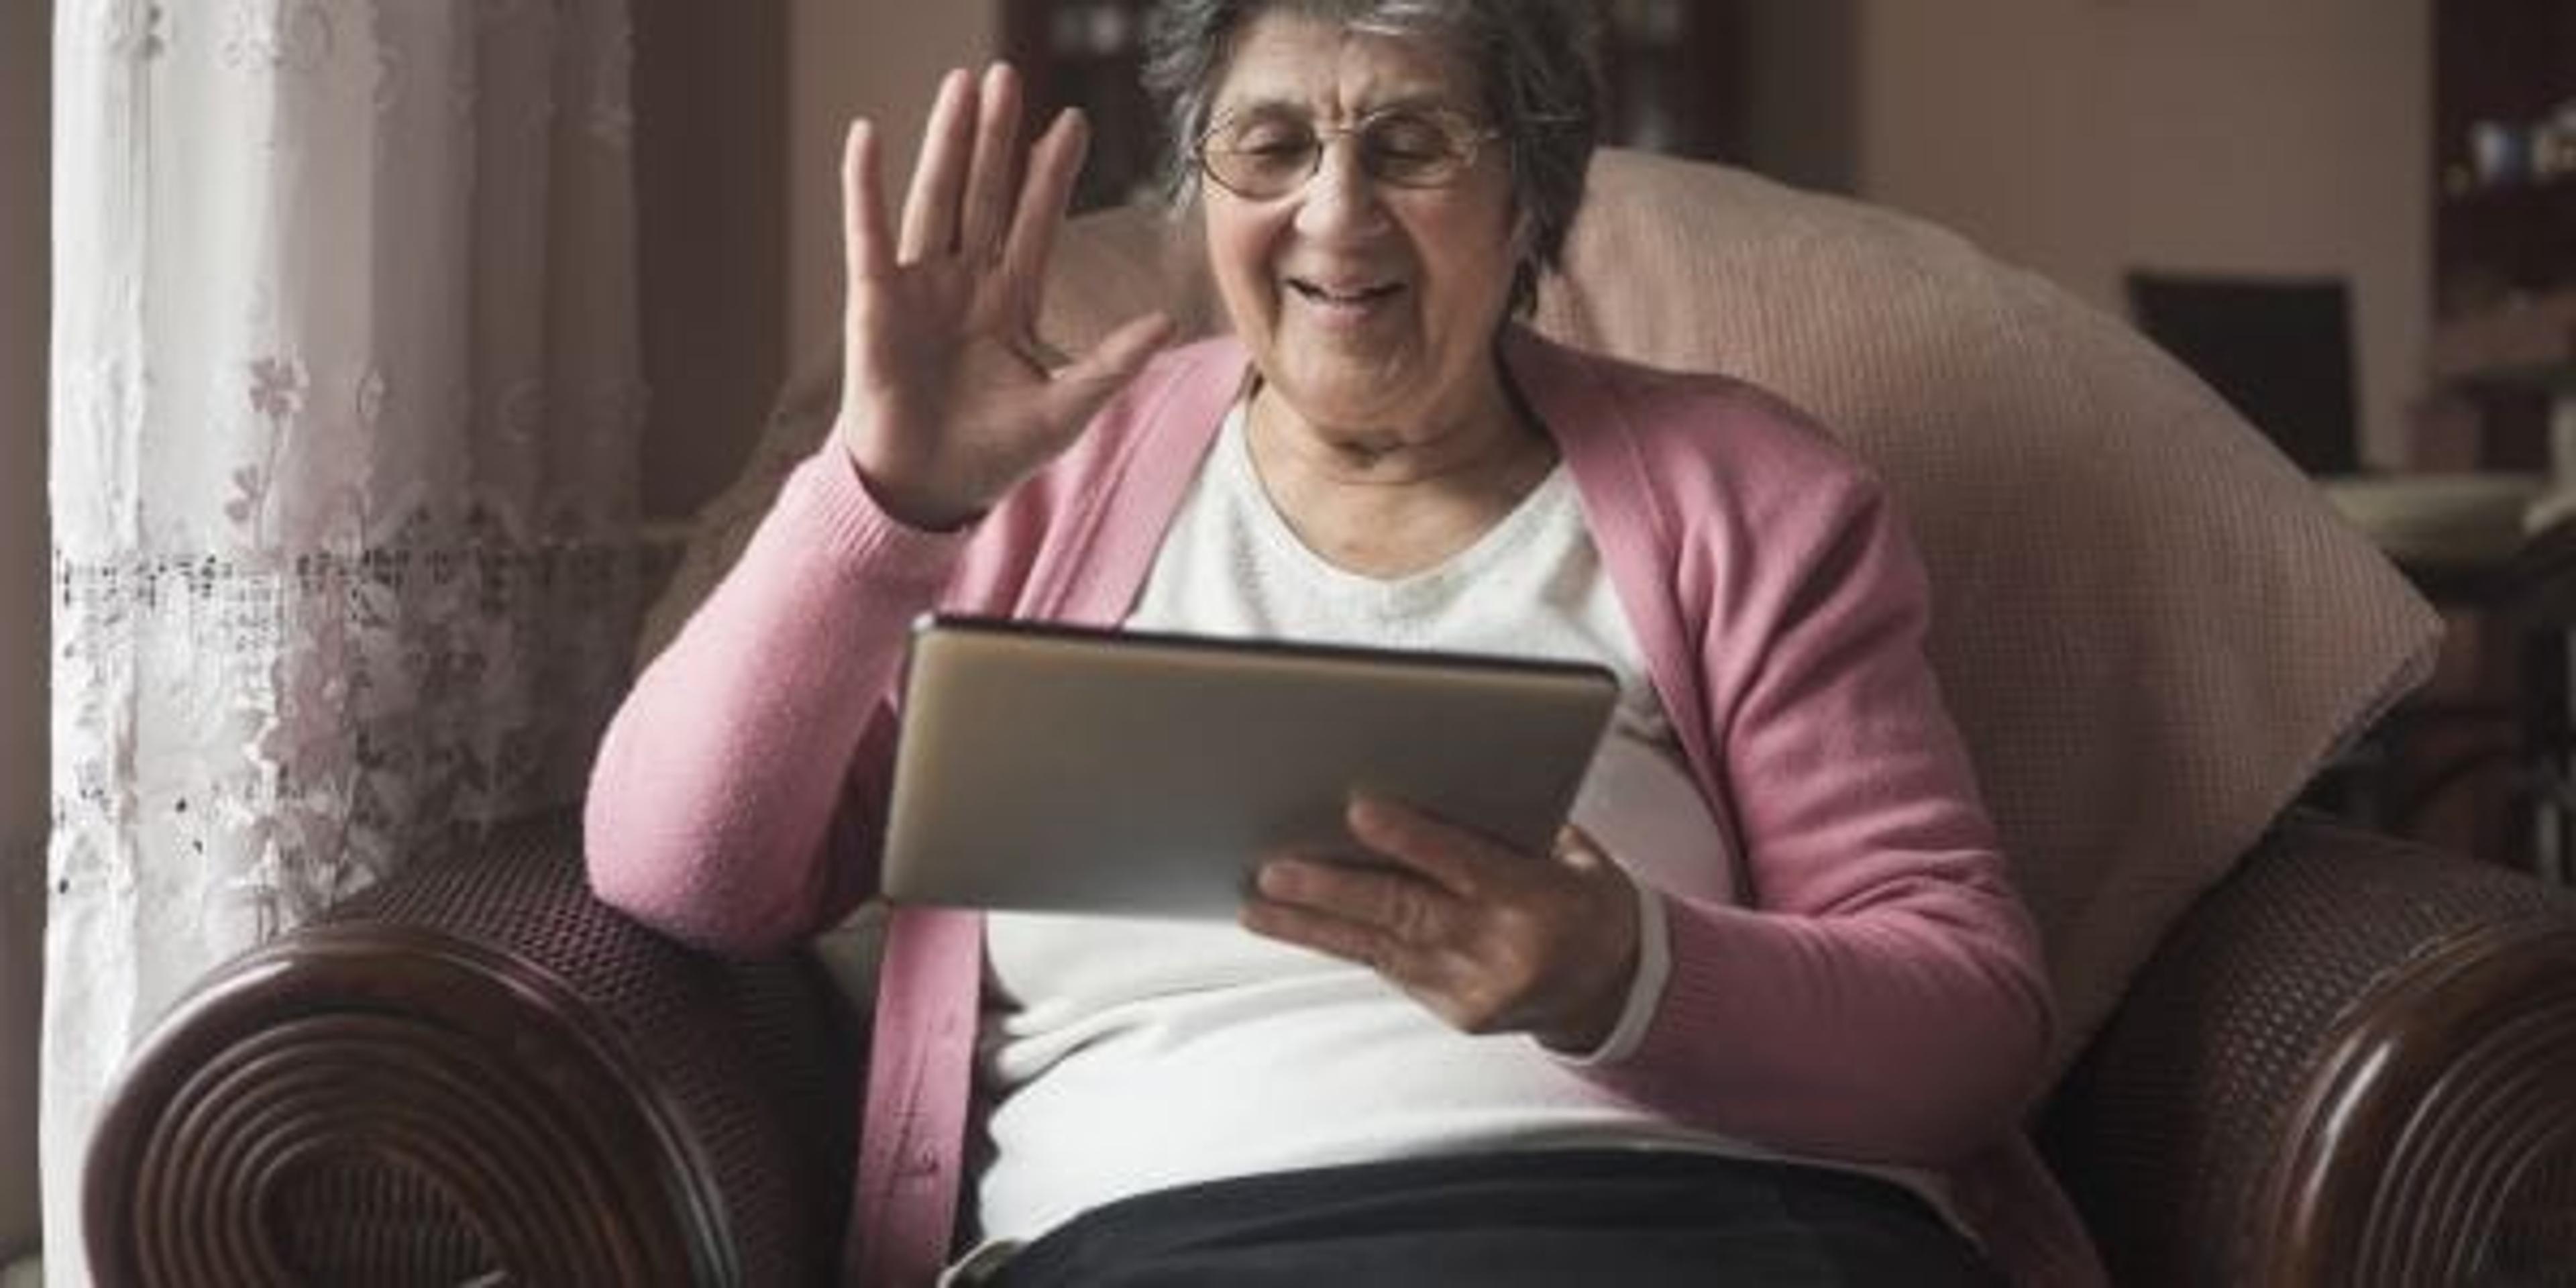 Elderly woman using Skype to talk to her family.